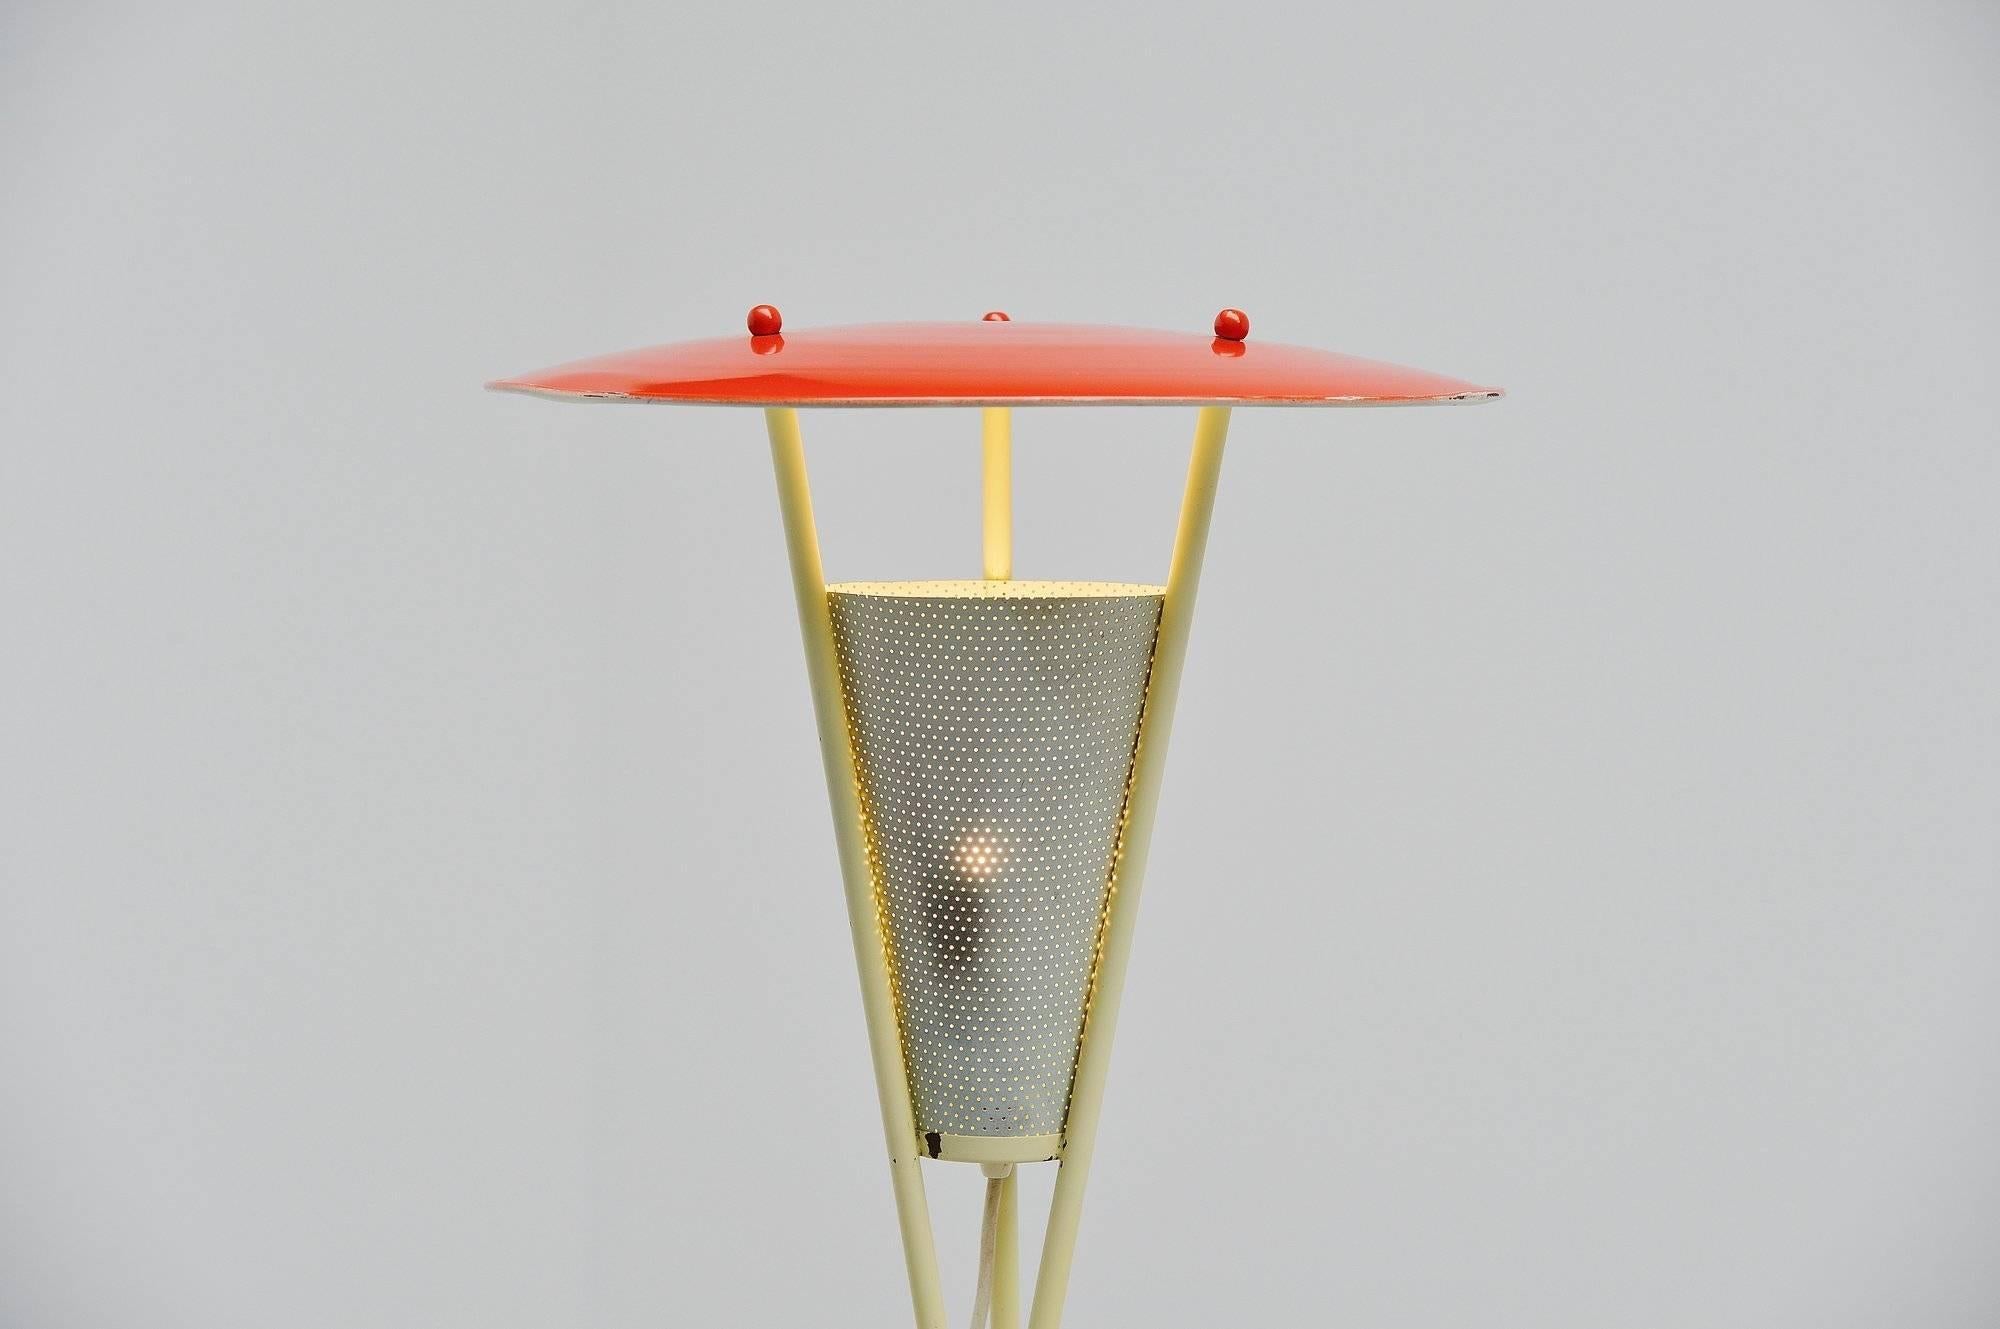 Very nice tripod floor lamp made by unknown manufacturer or designer, Holland, 1950. This lamp has a yellow tripod base, wrapped to each other with red plastic. The shade is lacquered red and the die cut diffuser shade is in white lacquered. The